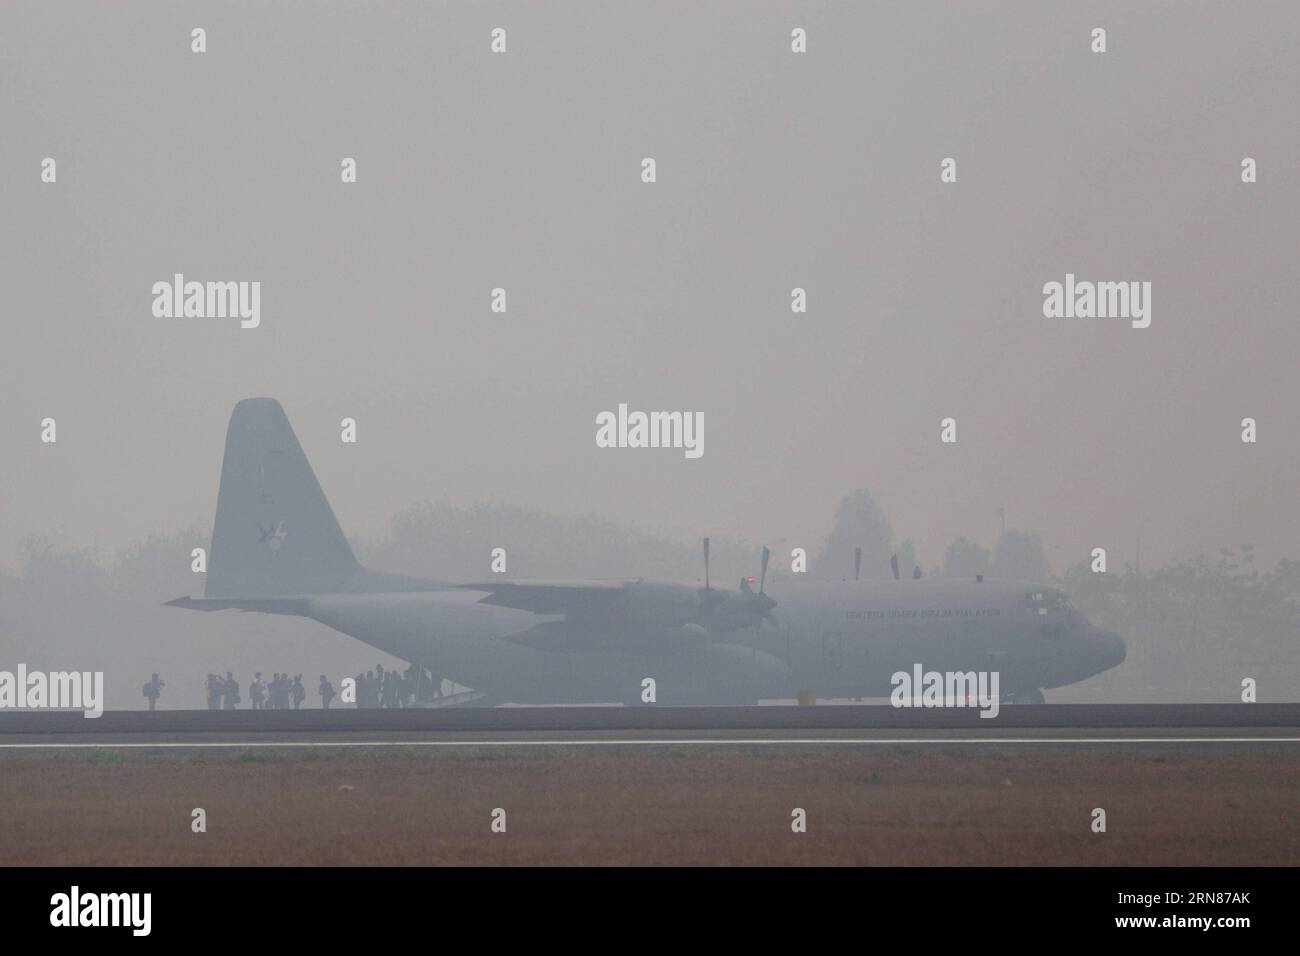 A C-130 Hercules plane from Malyasian Air Force lands at Sultan Mahmud Baddarudin II airport to help Indonesian government fight forest fire in Palembang, Indonesia, Oct. 9, 2015. Indonesian President Joko Widodo said on Thursday that he had sought help from Singapore, Malaysia, Russia and Japan to extinguish the forest and agriculture fires on the islands of Sumatra and Kalimantan, whose haze has affected Singapore and Malaysia. A fire-fighting team from Singapore has arrived in Indonesia on Friday with more teams from Malaysia, Australia, Russia, China and South Korea expected to arrive in t Stock Photo